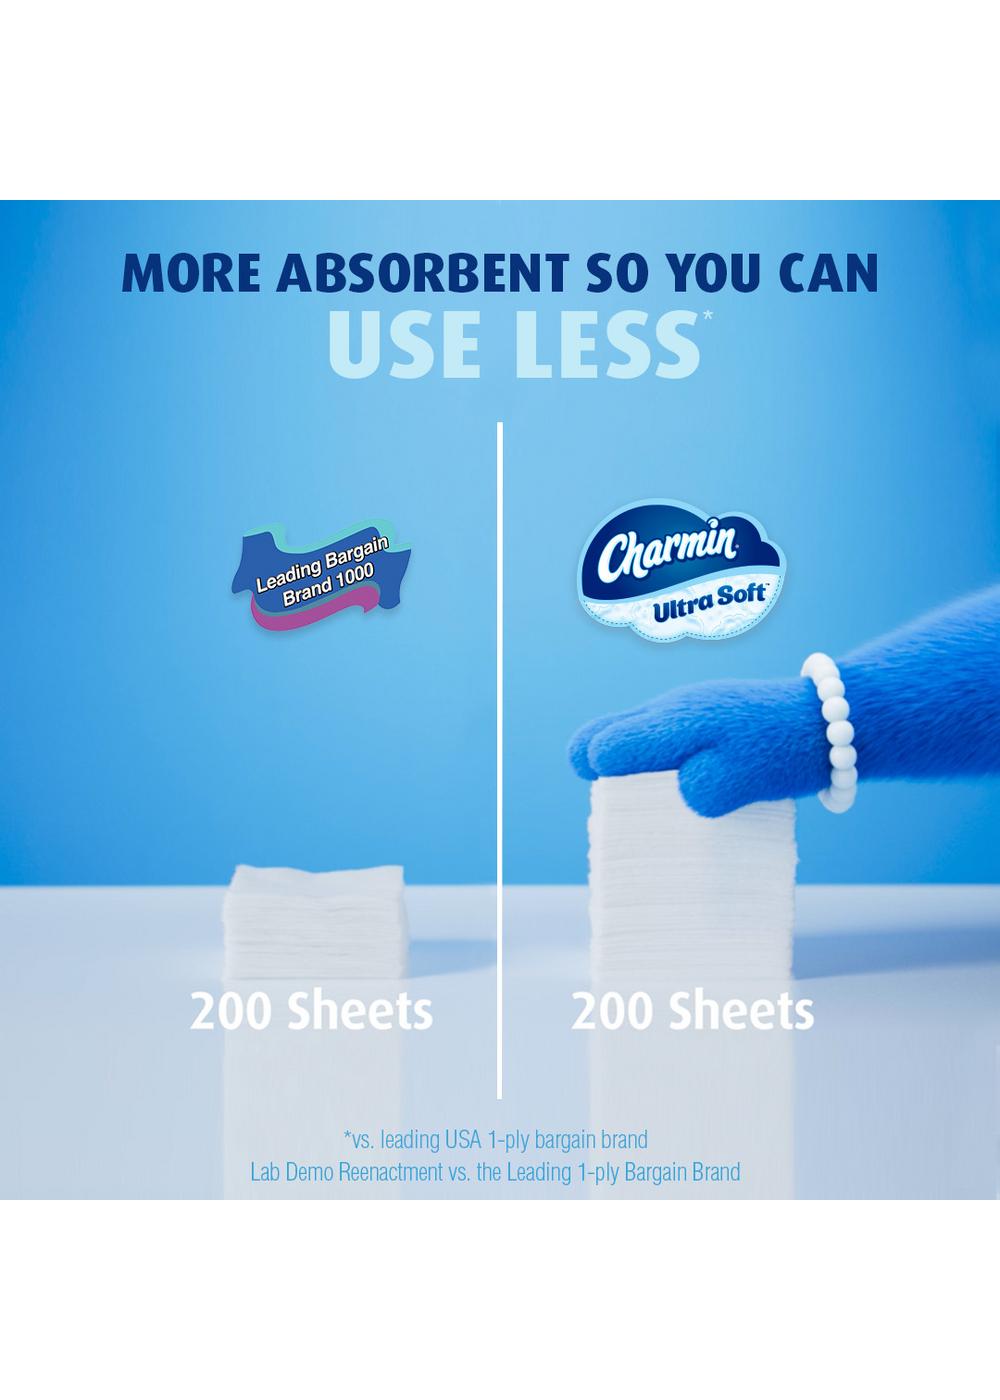 Charmin Ultra Soft Toilet Paper; image 16 of 20